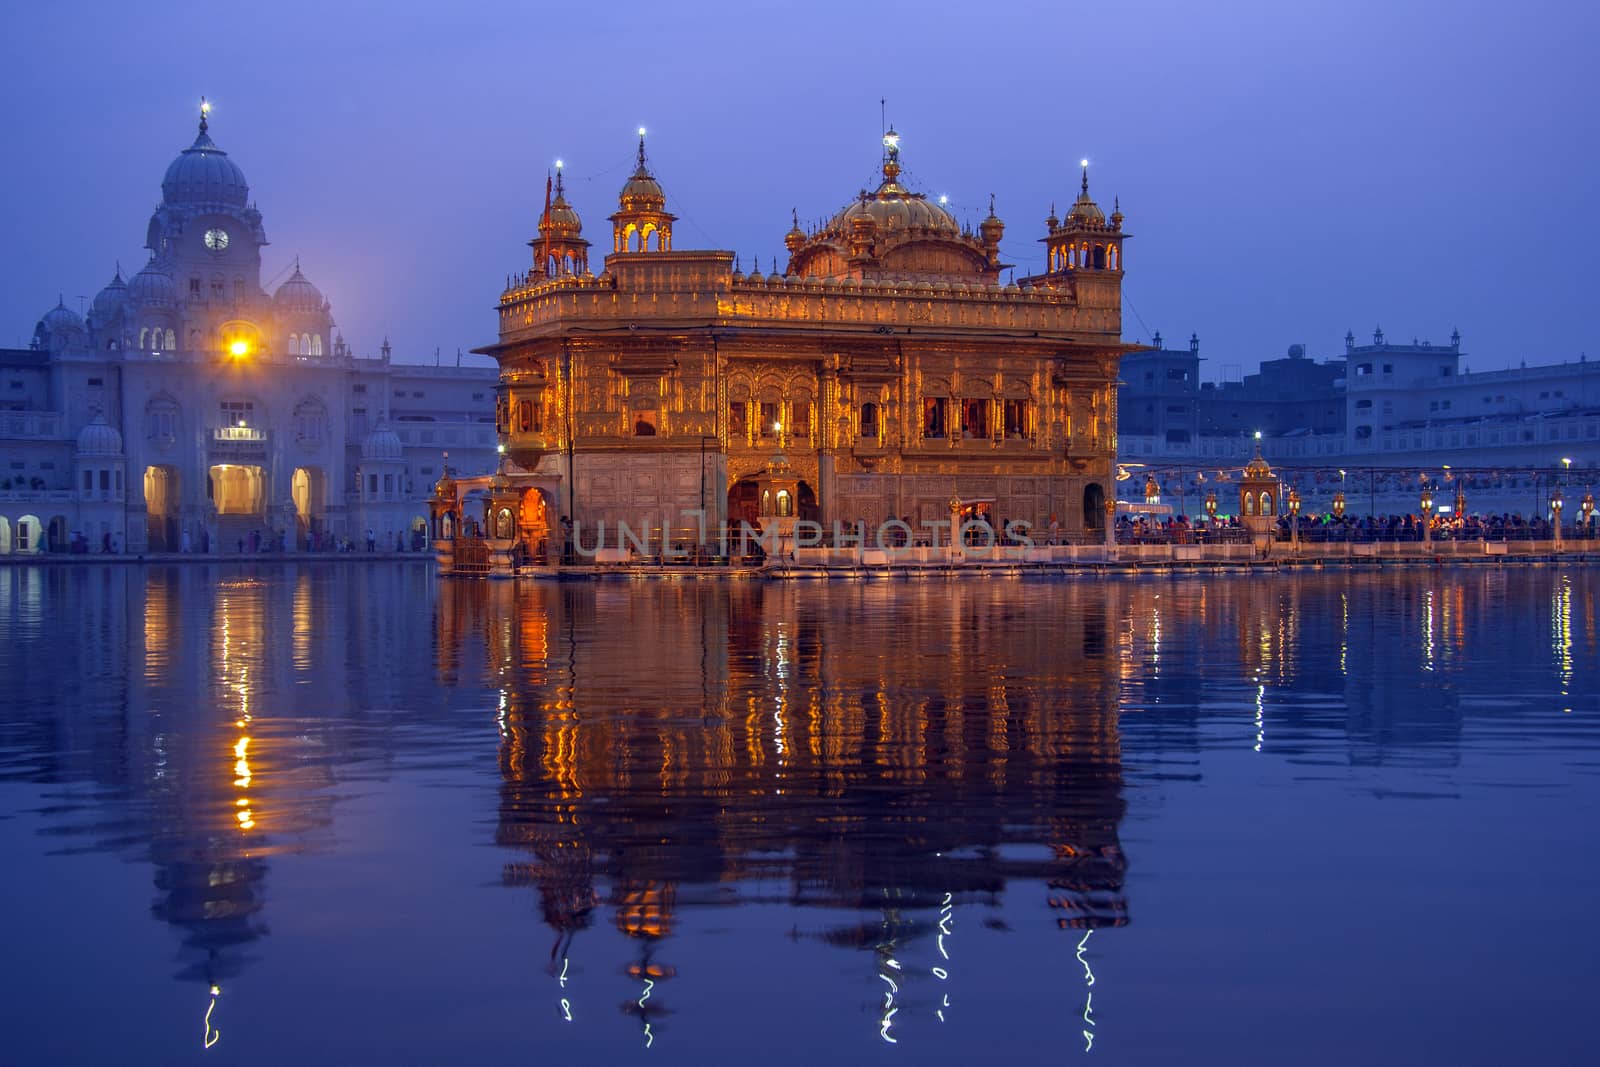 The Golden Temple or Harmandir Sahib in the city of Amritsar in the Punjab region of northwest India. The center of the Sikh faith and the site of its holiest shrine.